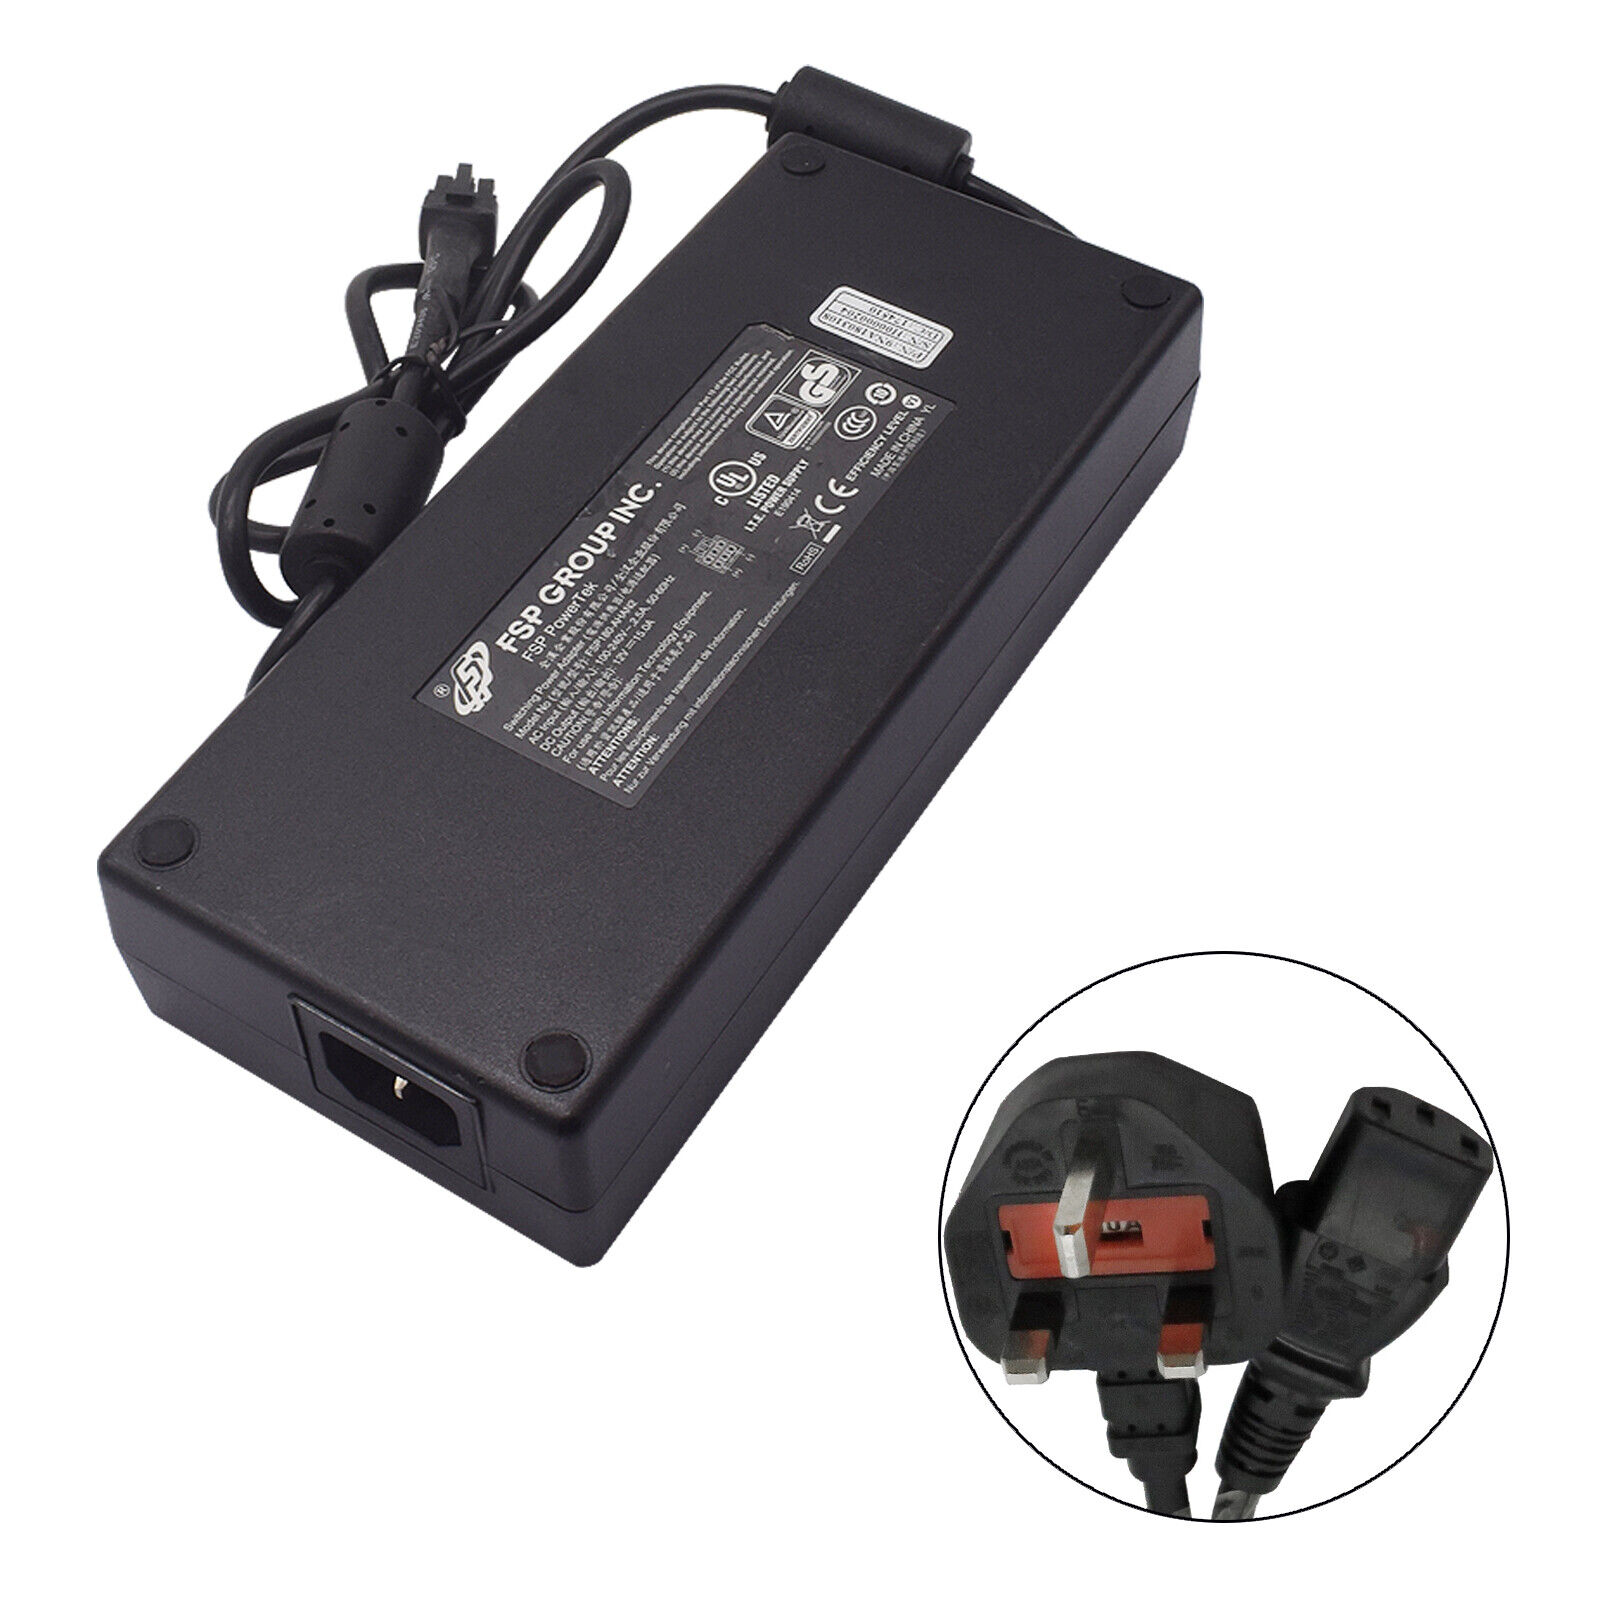 Original FSP FSP180-AHAN1 180W 12V 15A 6-PIN Switching Power Supply AC Adapter Model: FSP075-DMAB1 Type: AC/AC Adapt - Click Image to Close